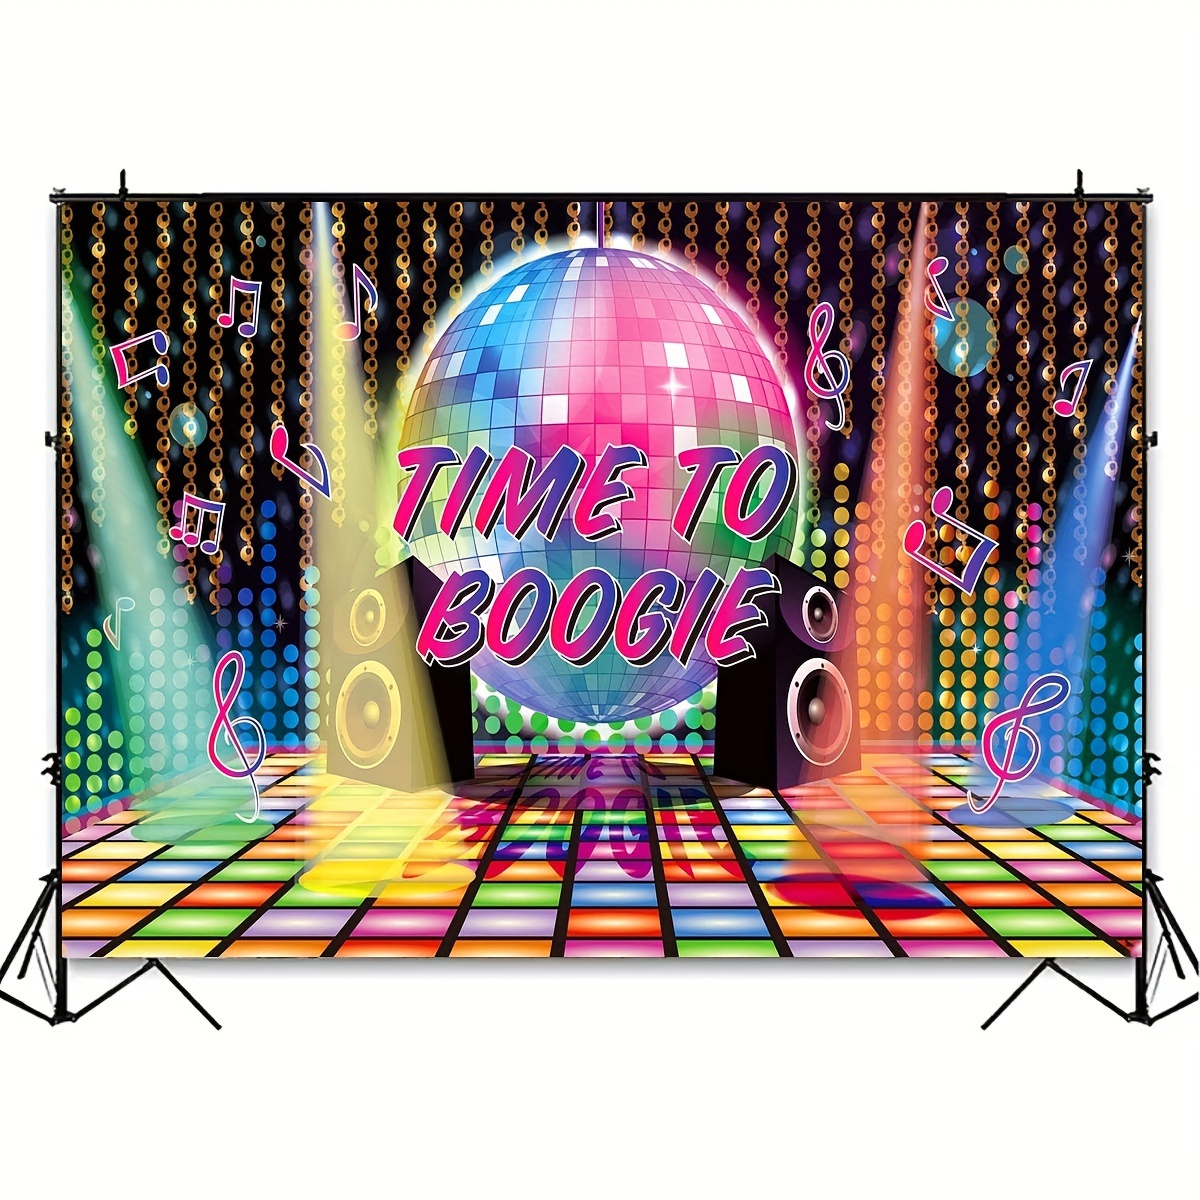  Disco 70s Theme Party Decorations Back to 60s 70s 80s